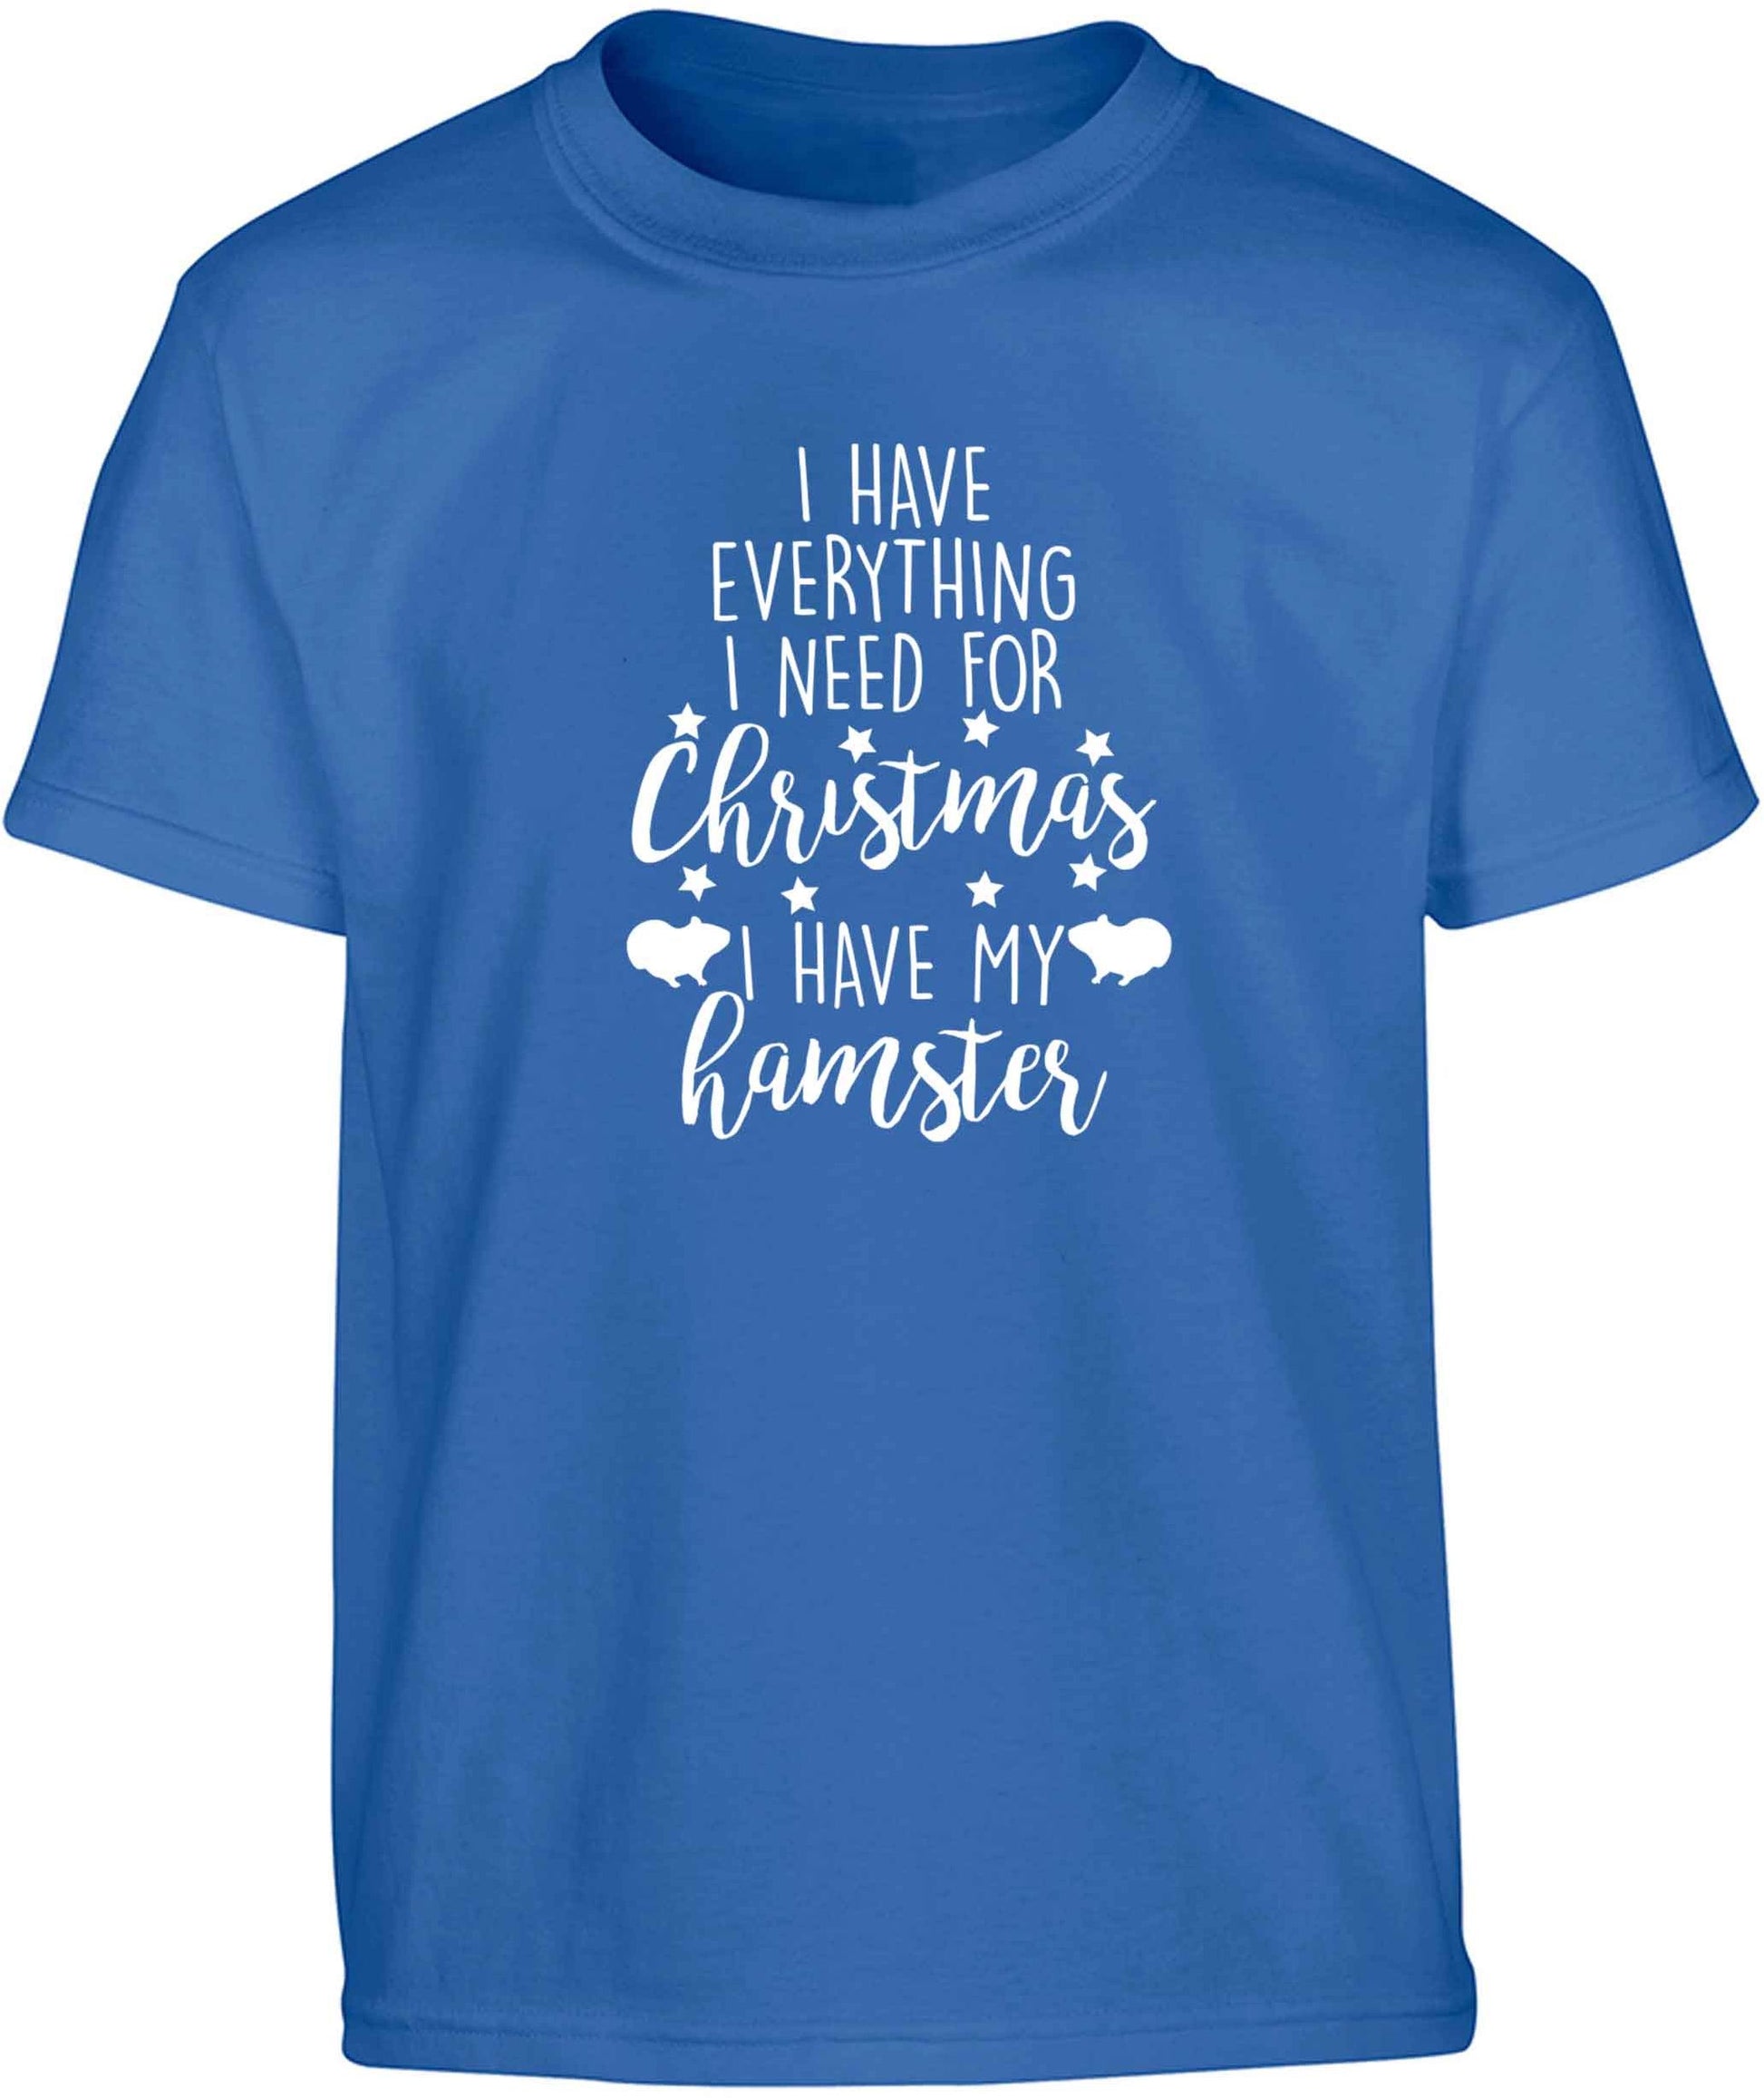 I have everything I need for Christmas I have my hamster Children's blue Tshirt 12-13 Years